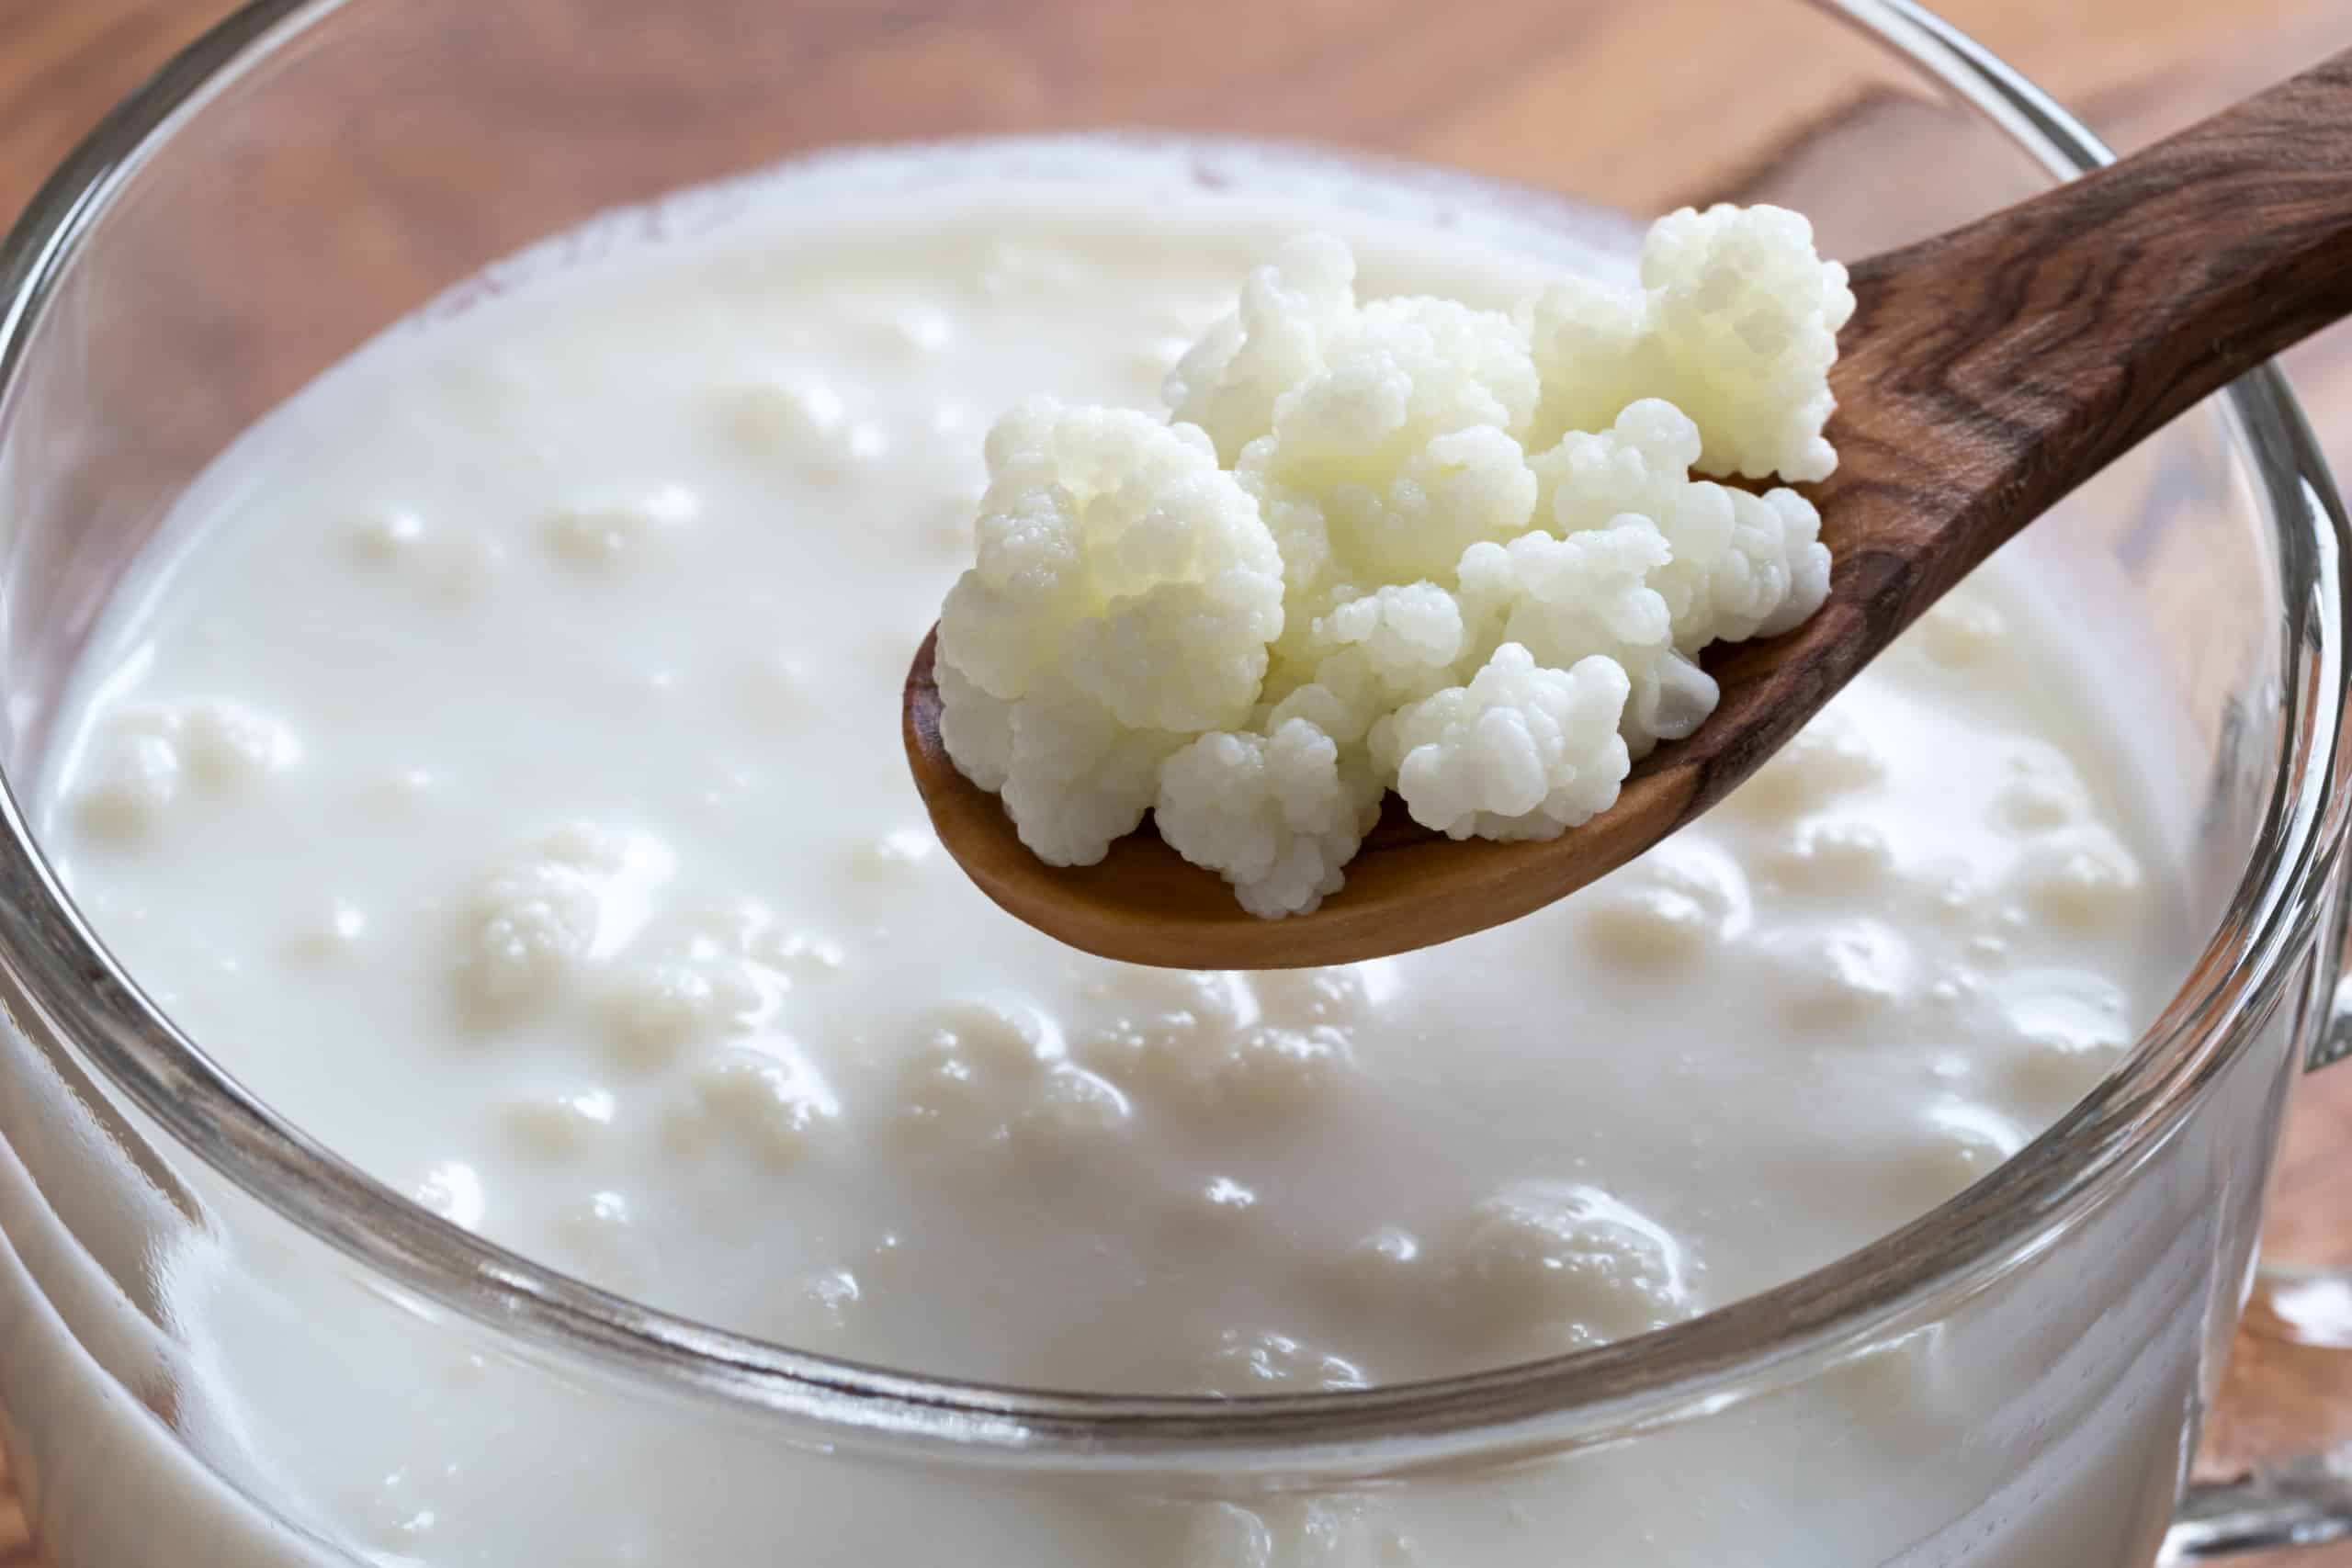 How To Store Kefir Grains